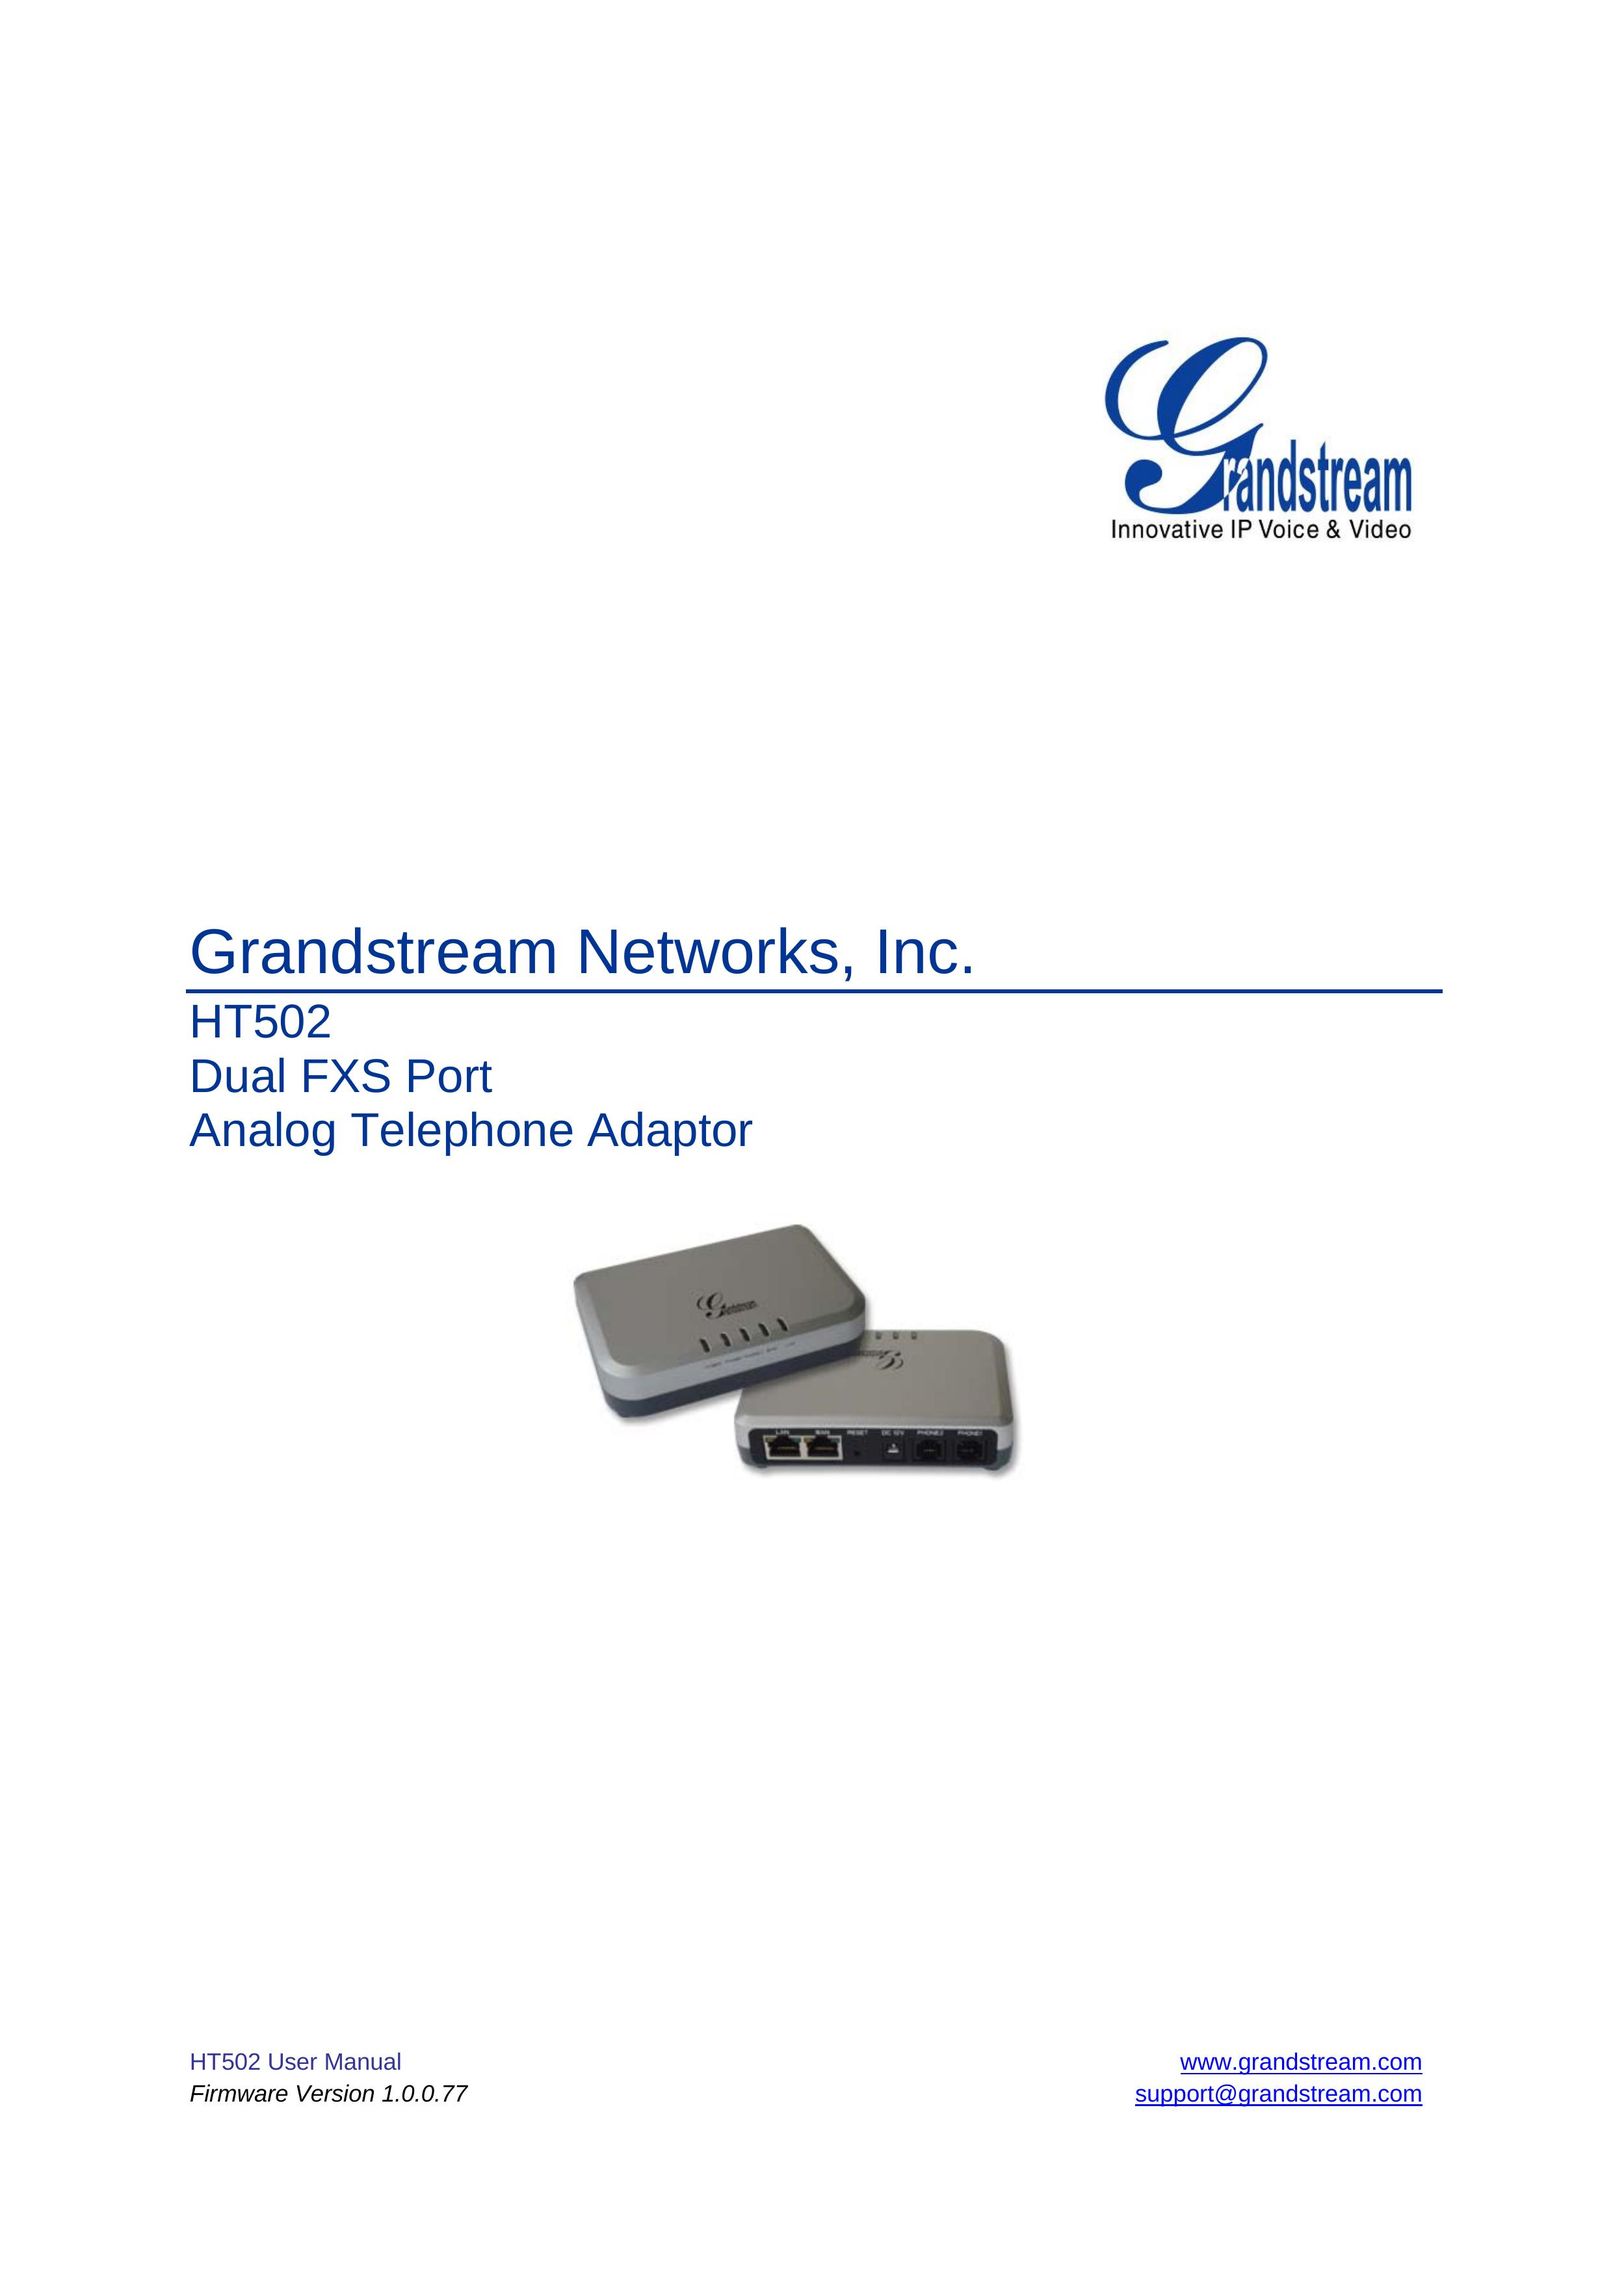 Grandstream Networks HT502 Telephone Accessories User Manual